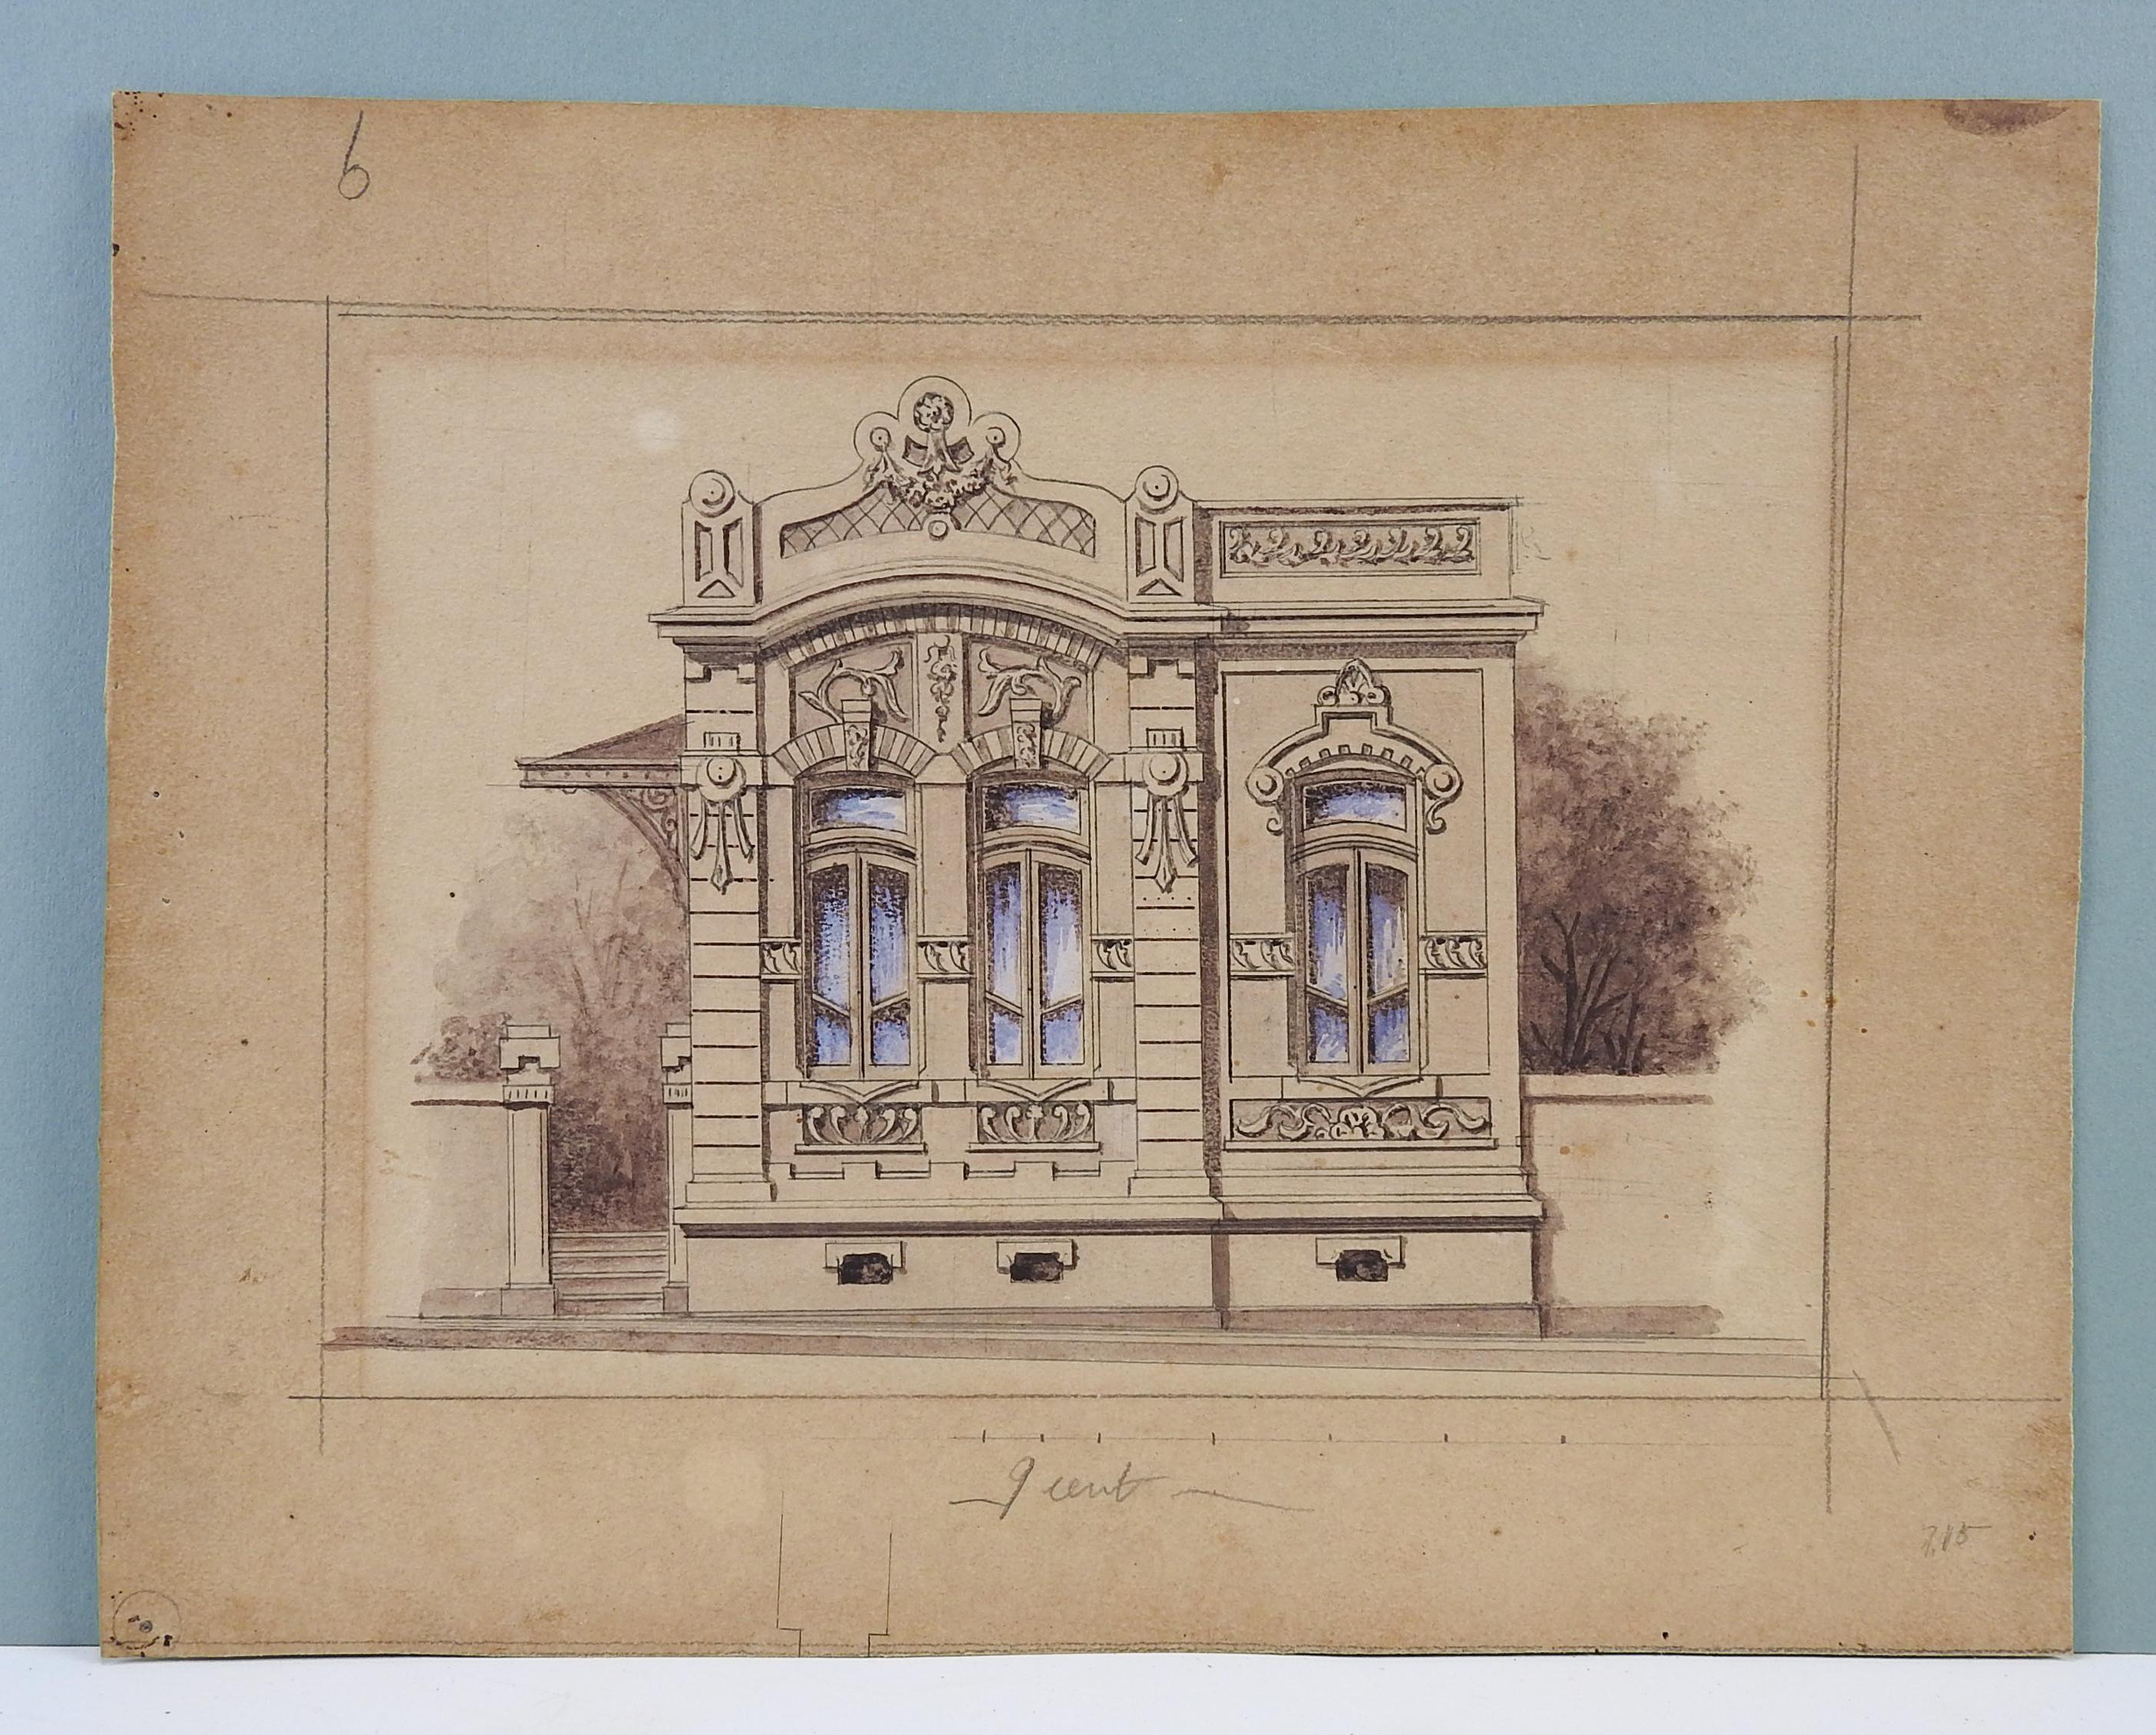 Architectural rendering in watercolor, gouache, and pencil on paper by Luiz Olivieri Italy/Brazil, circa 1900. Unsigned. Unframed, age toning, edge wear.